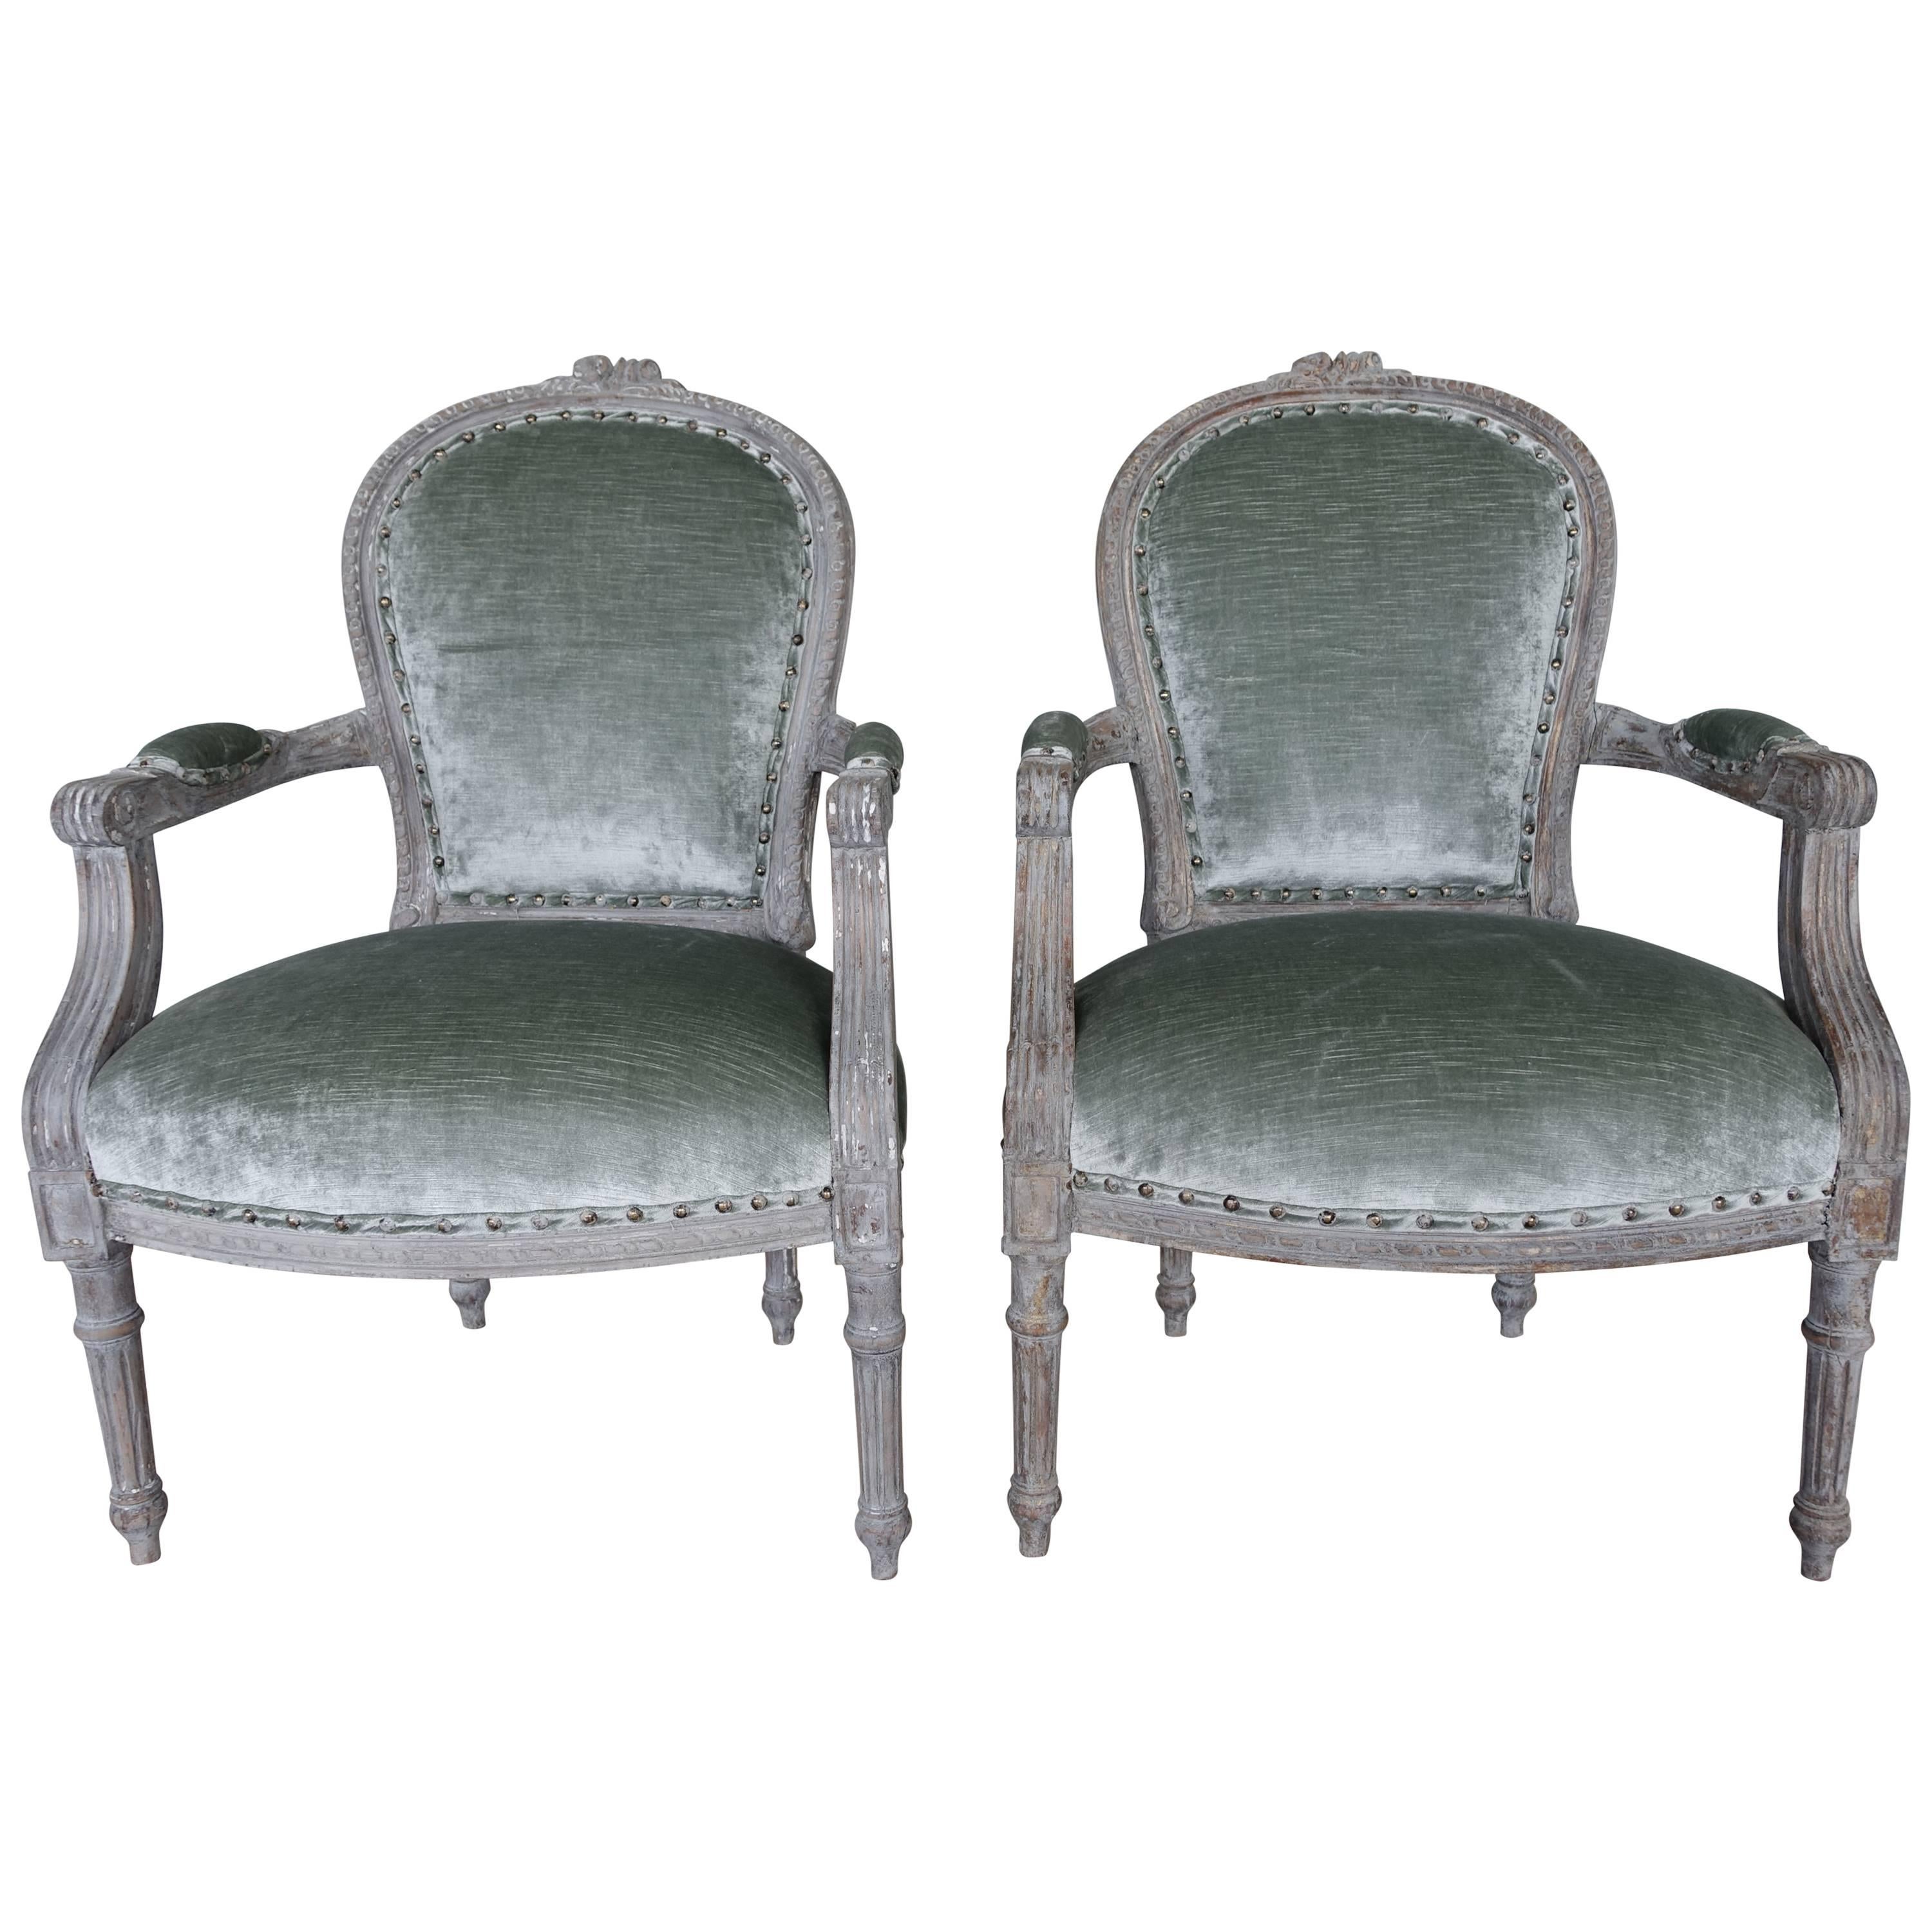 Pair of Louis XVI Style French Painted Armchairs